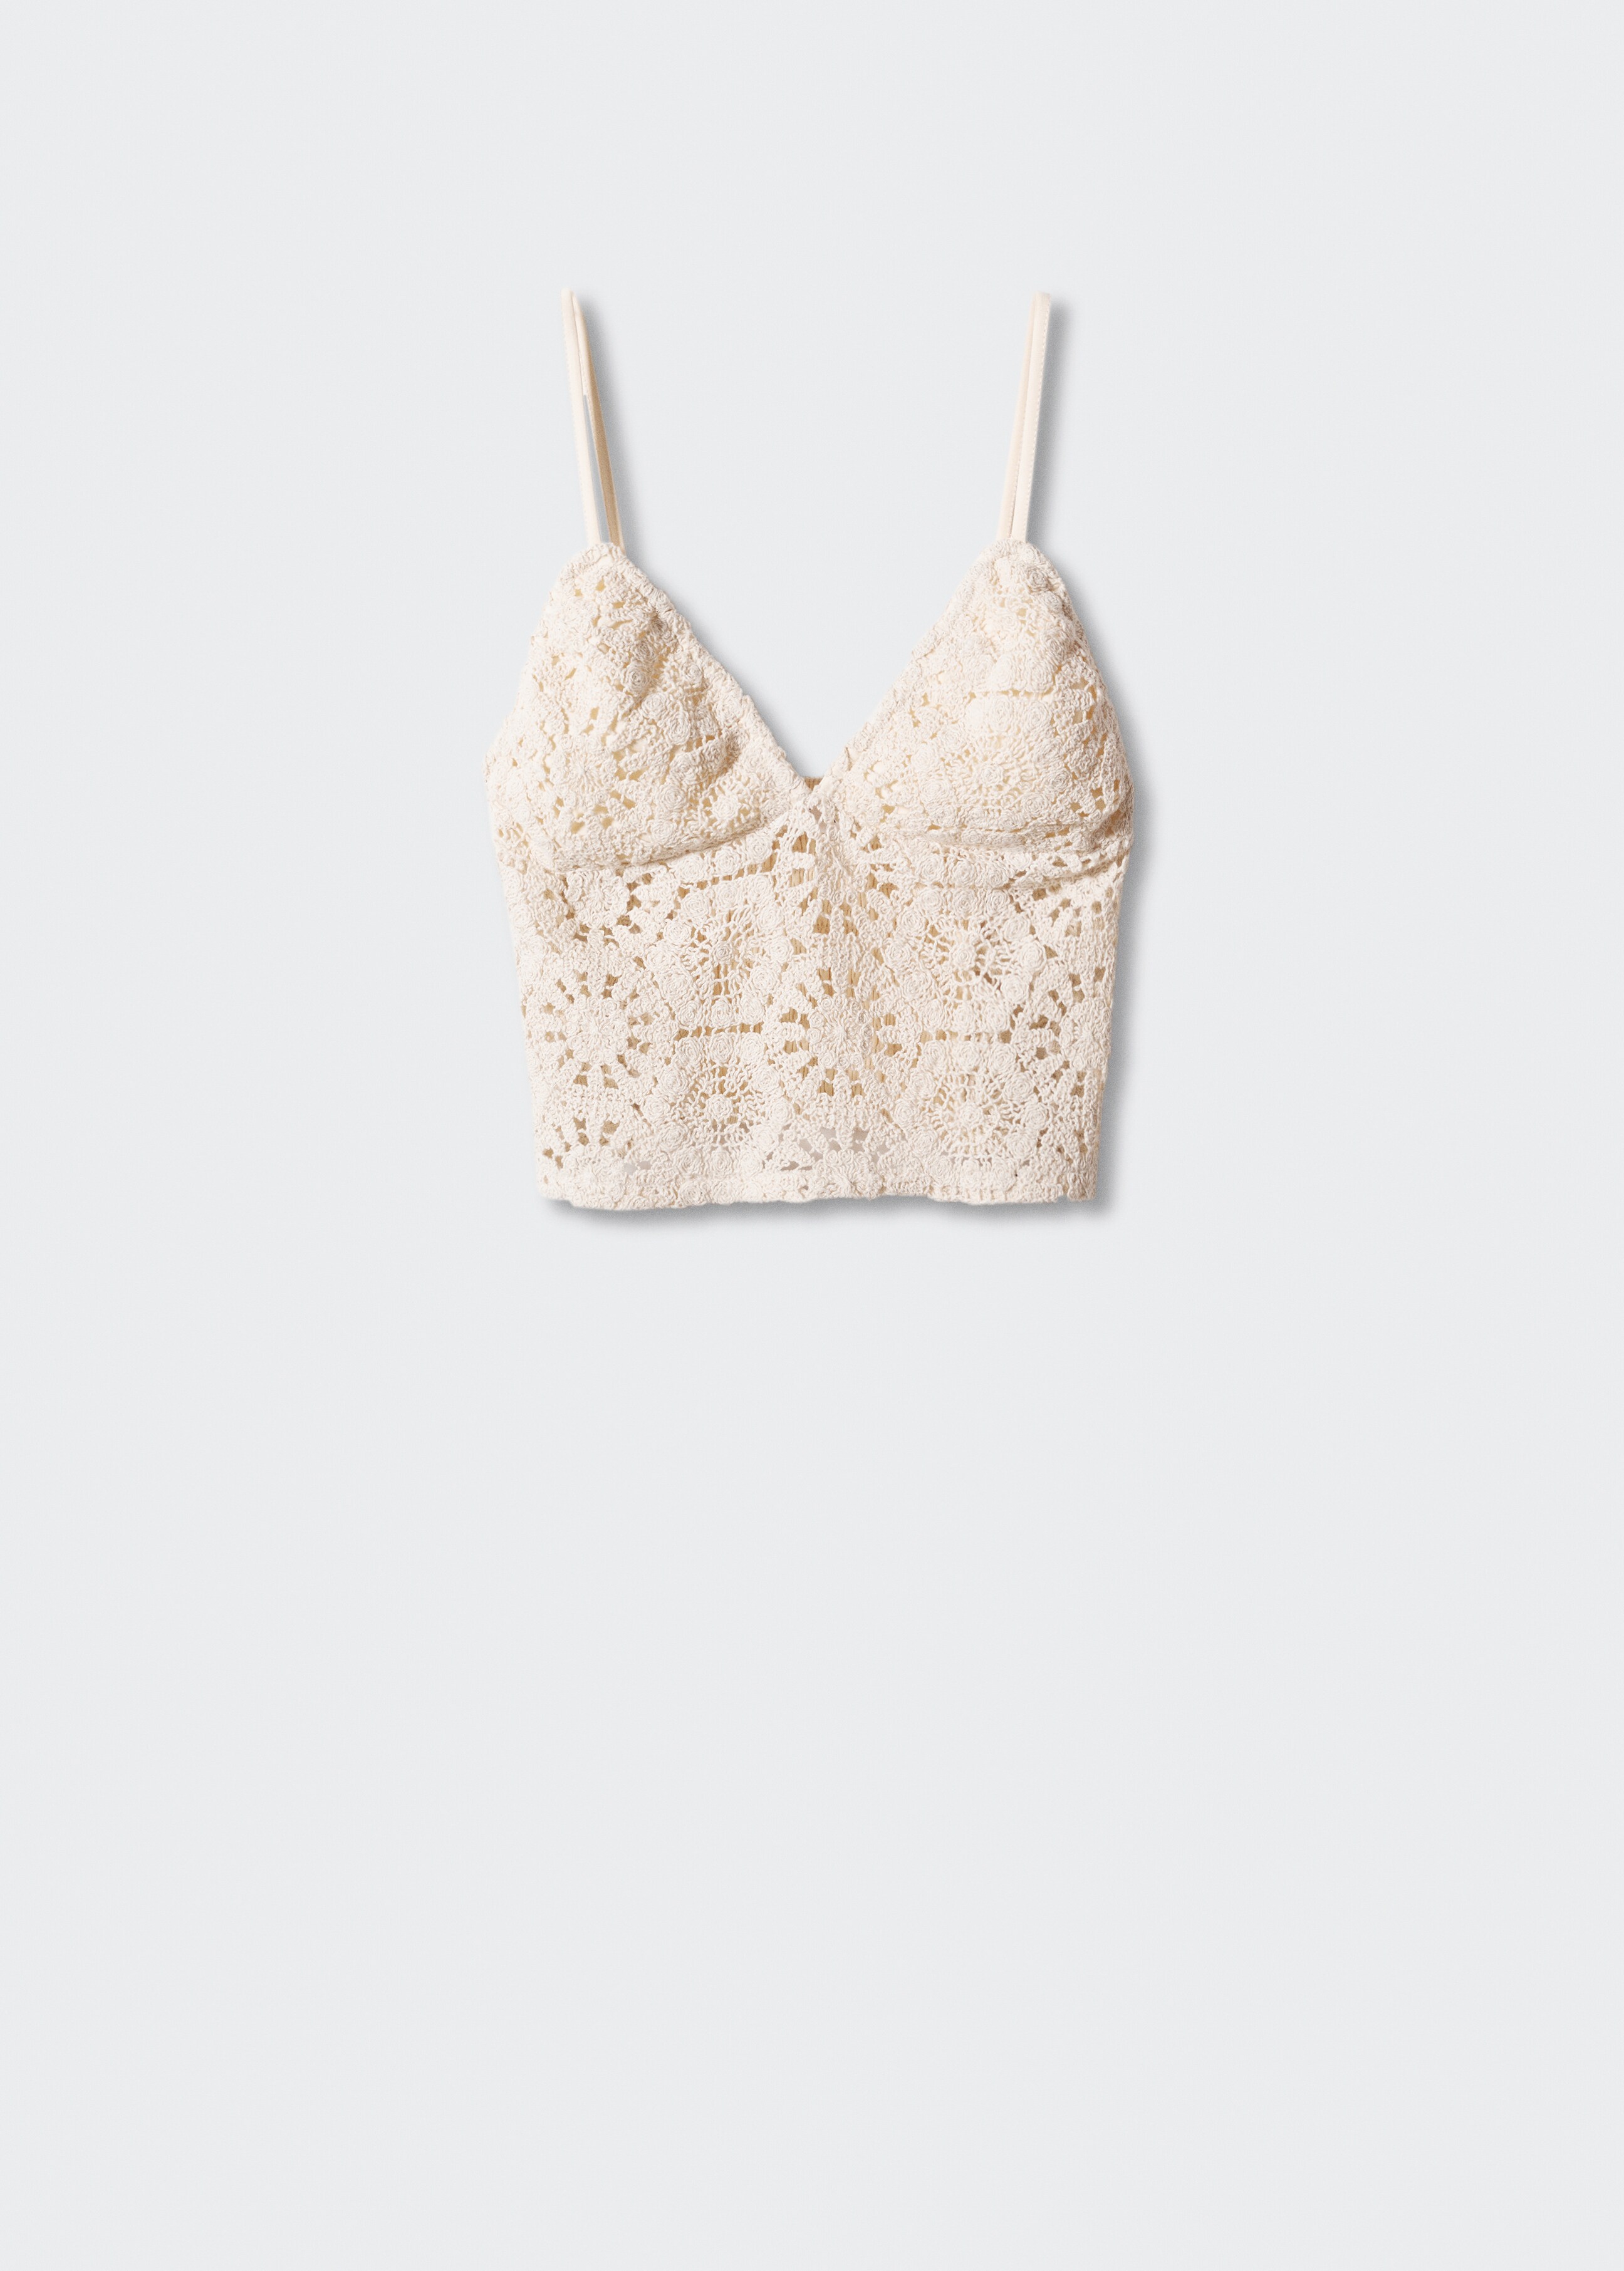 Crochet crop top - Article without model